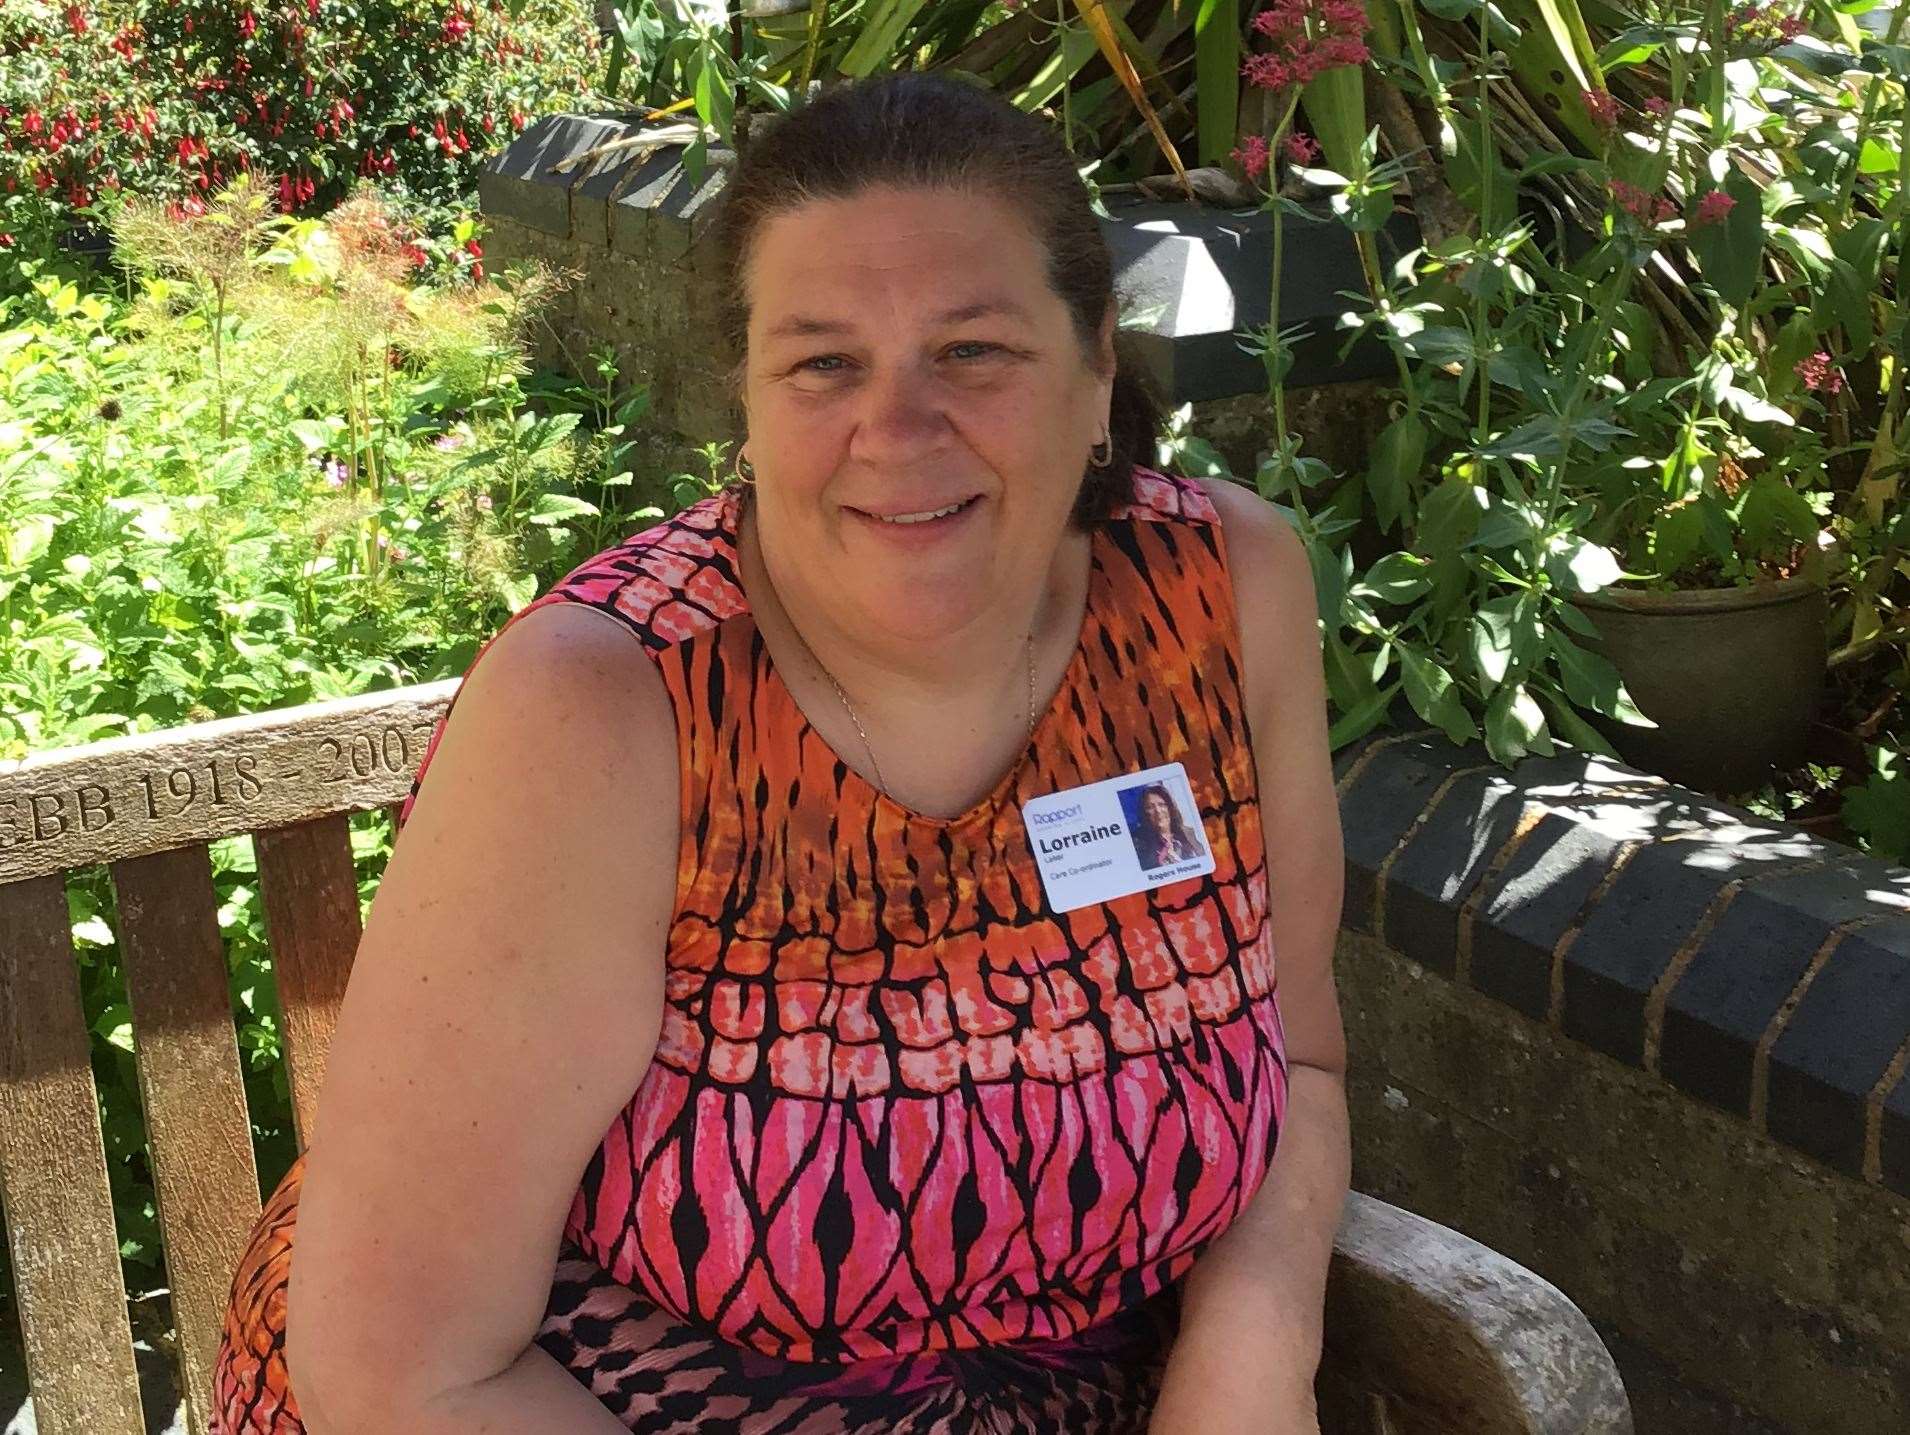 Lorraine Laker works in Wigmore as a care home worker